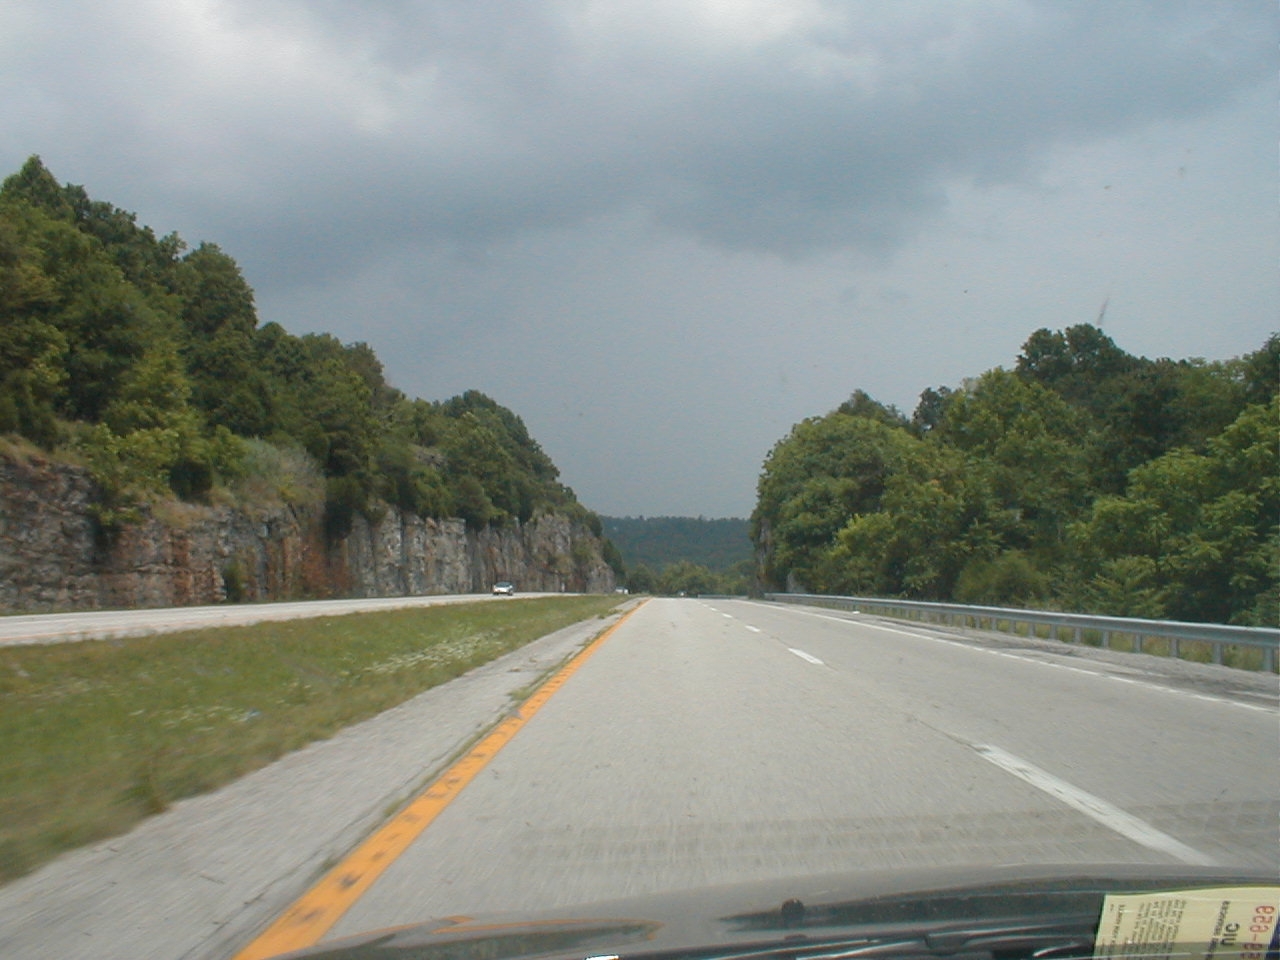 Descending into a valley in eastern Adair County.